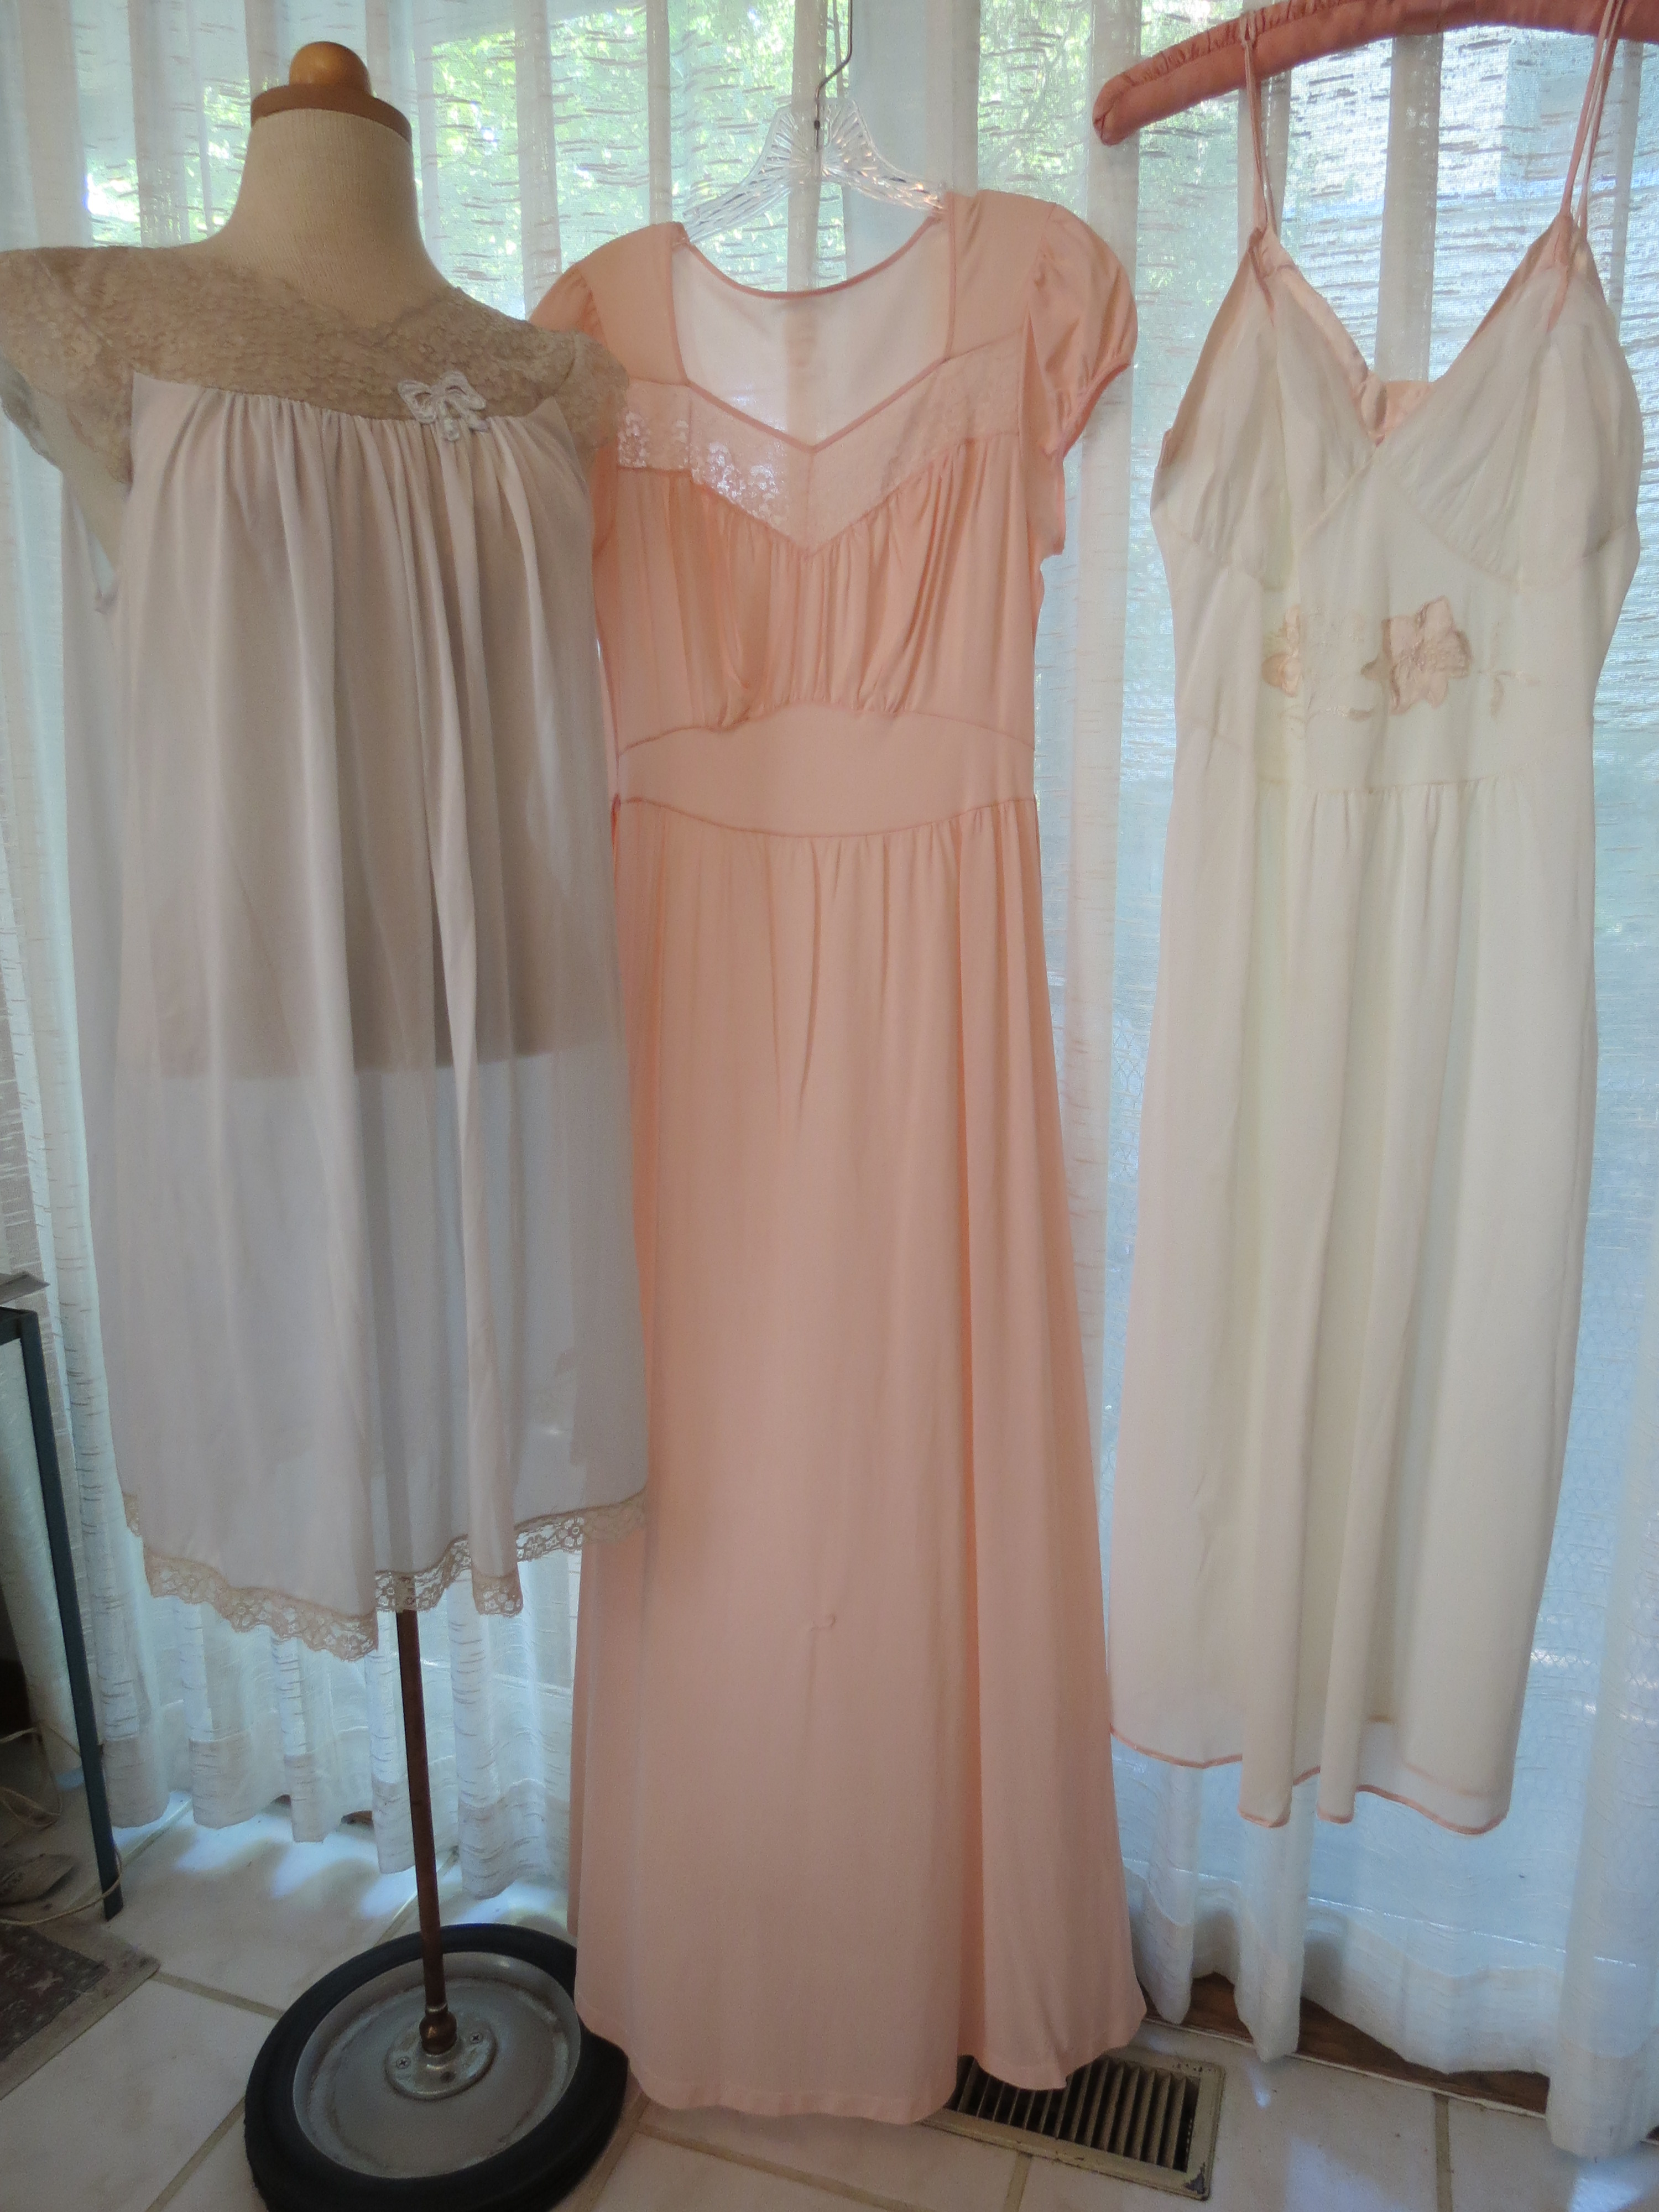 TRUE VINTAGE NIGHTGOWNS - 1940'S TO 1950'S